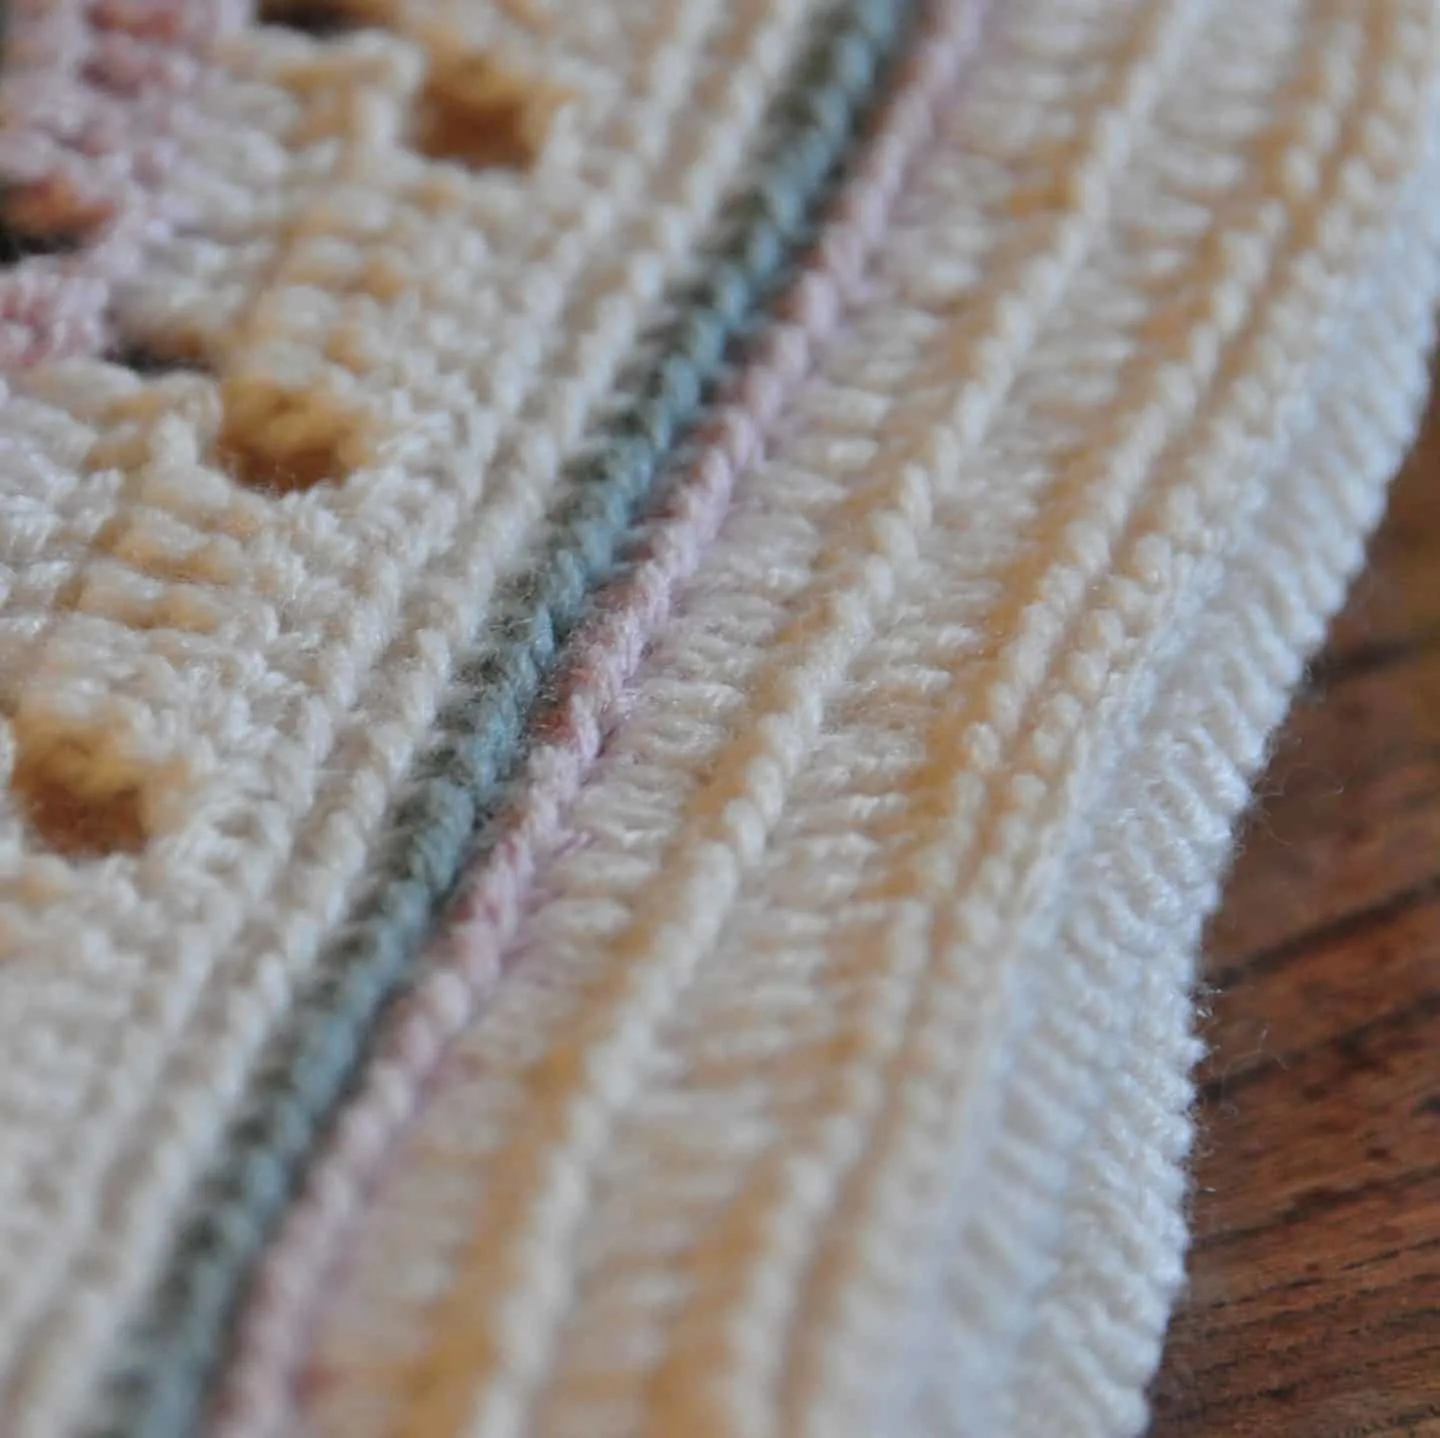 Learn to crochet this soft and subtle baby blanket as the perfect gift for a new arrival. Including a free crochet pattern and stitch tutorial anyone, even beginners, can master this filet crochet technique.